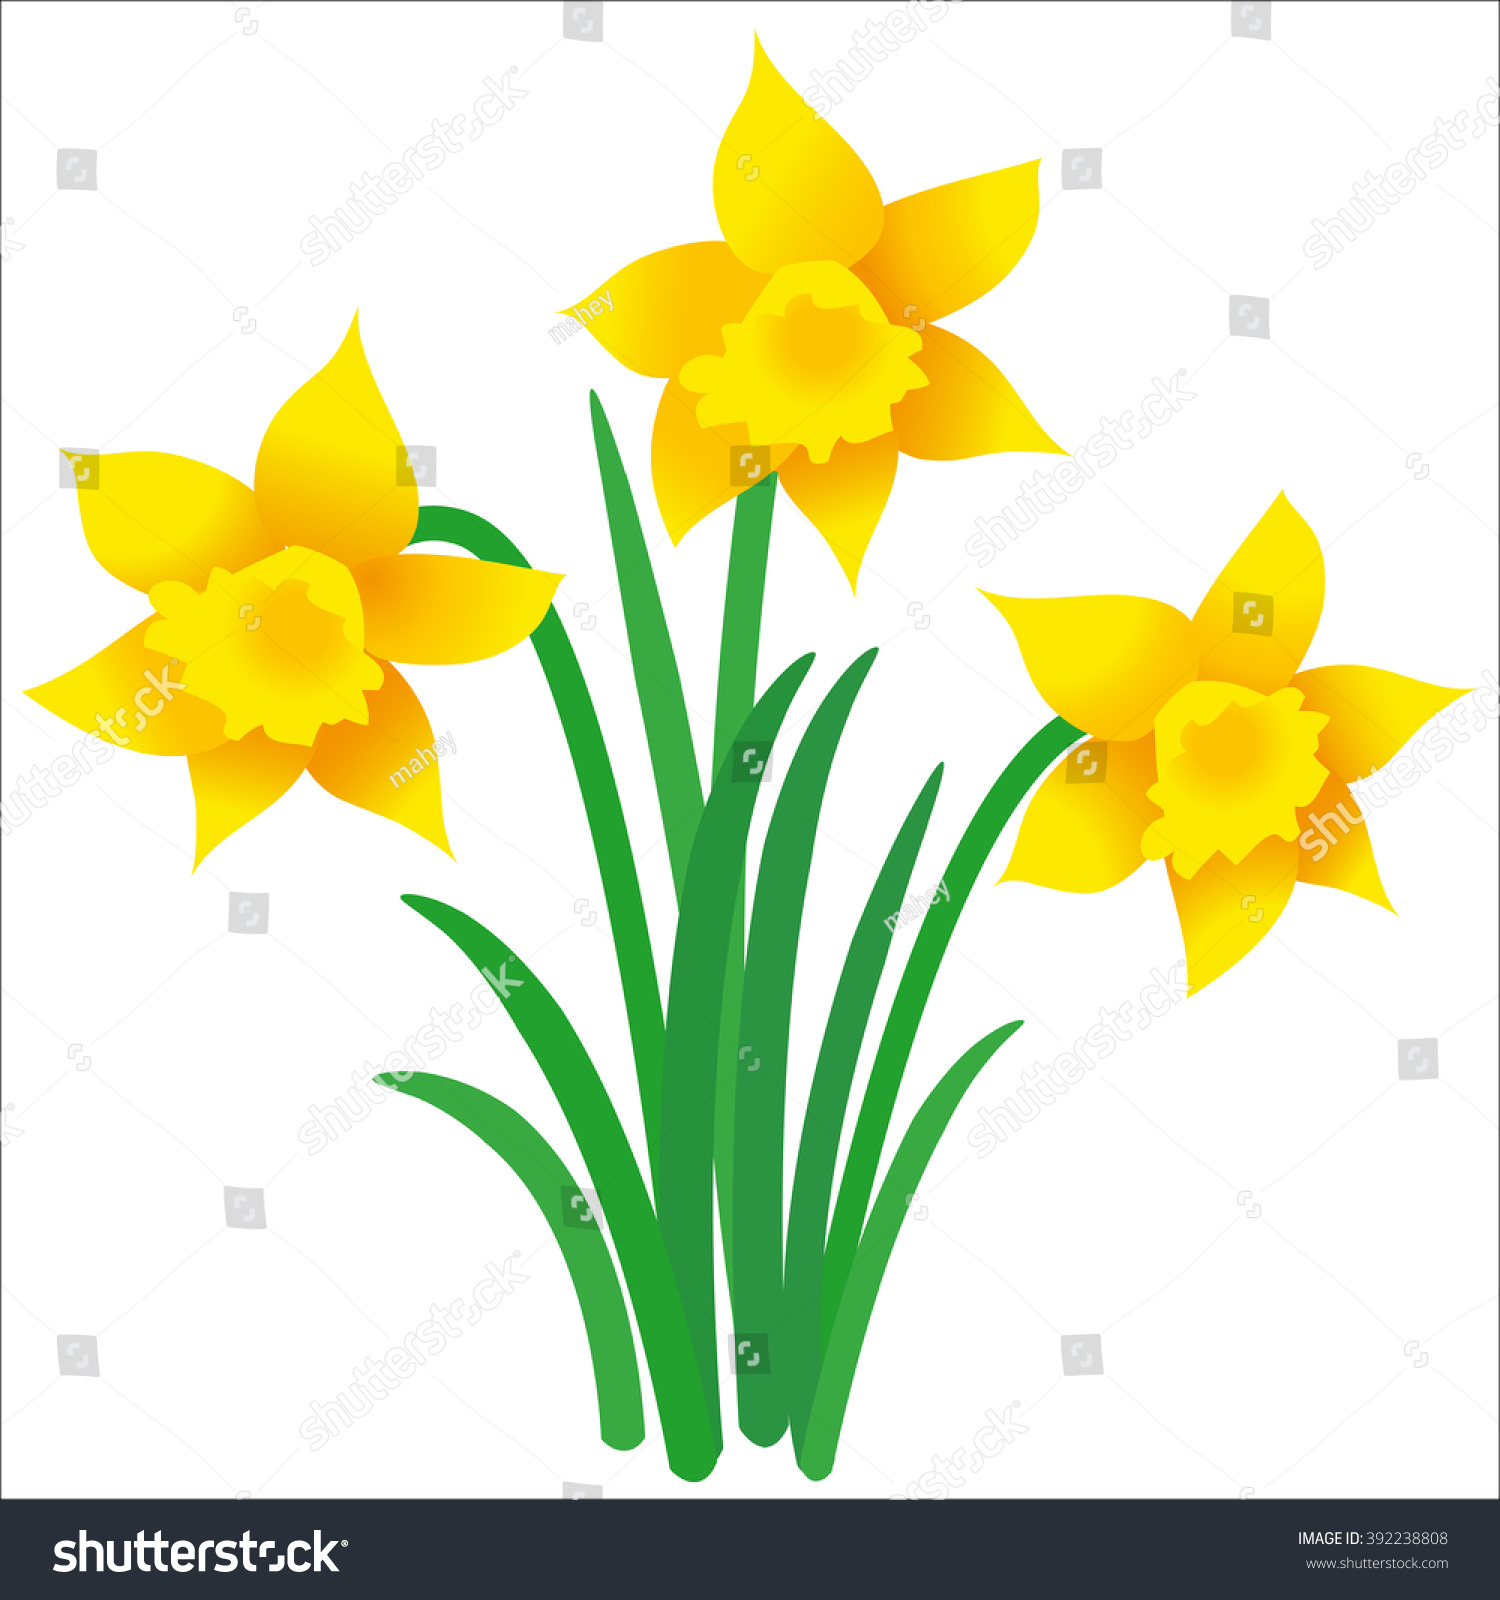 SVG of Illustration of three daffodils with leaves on white background; Vector graphic of Easter motif svg